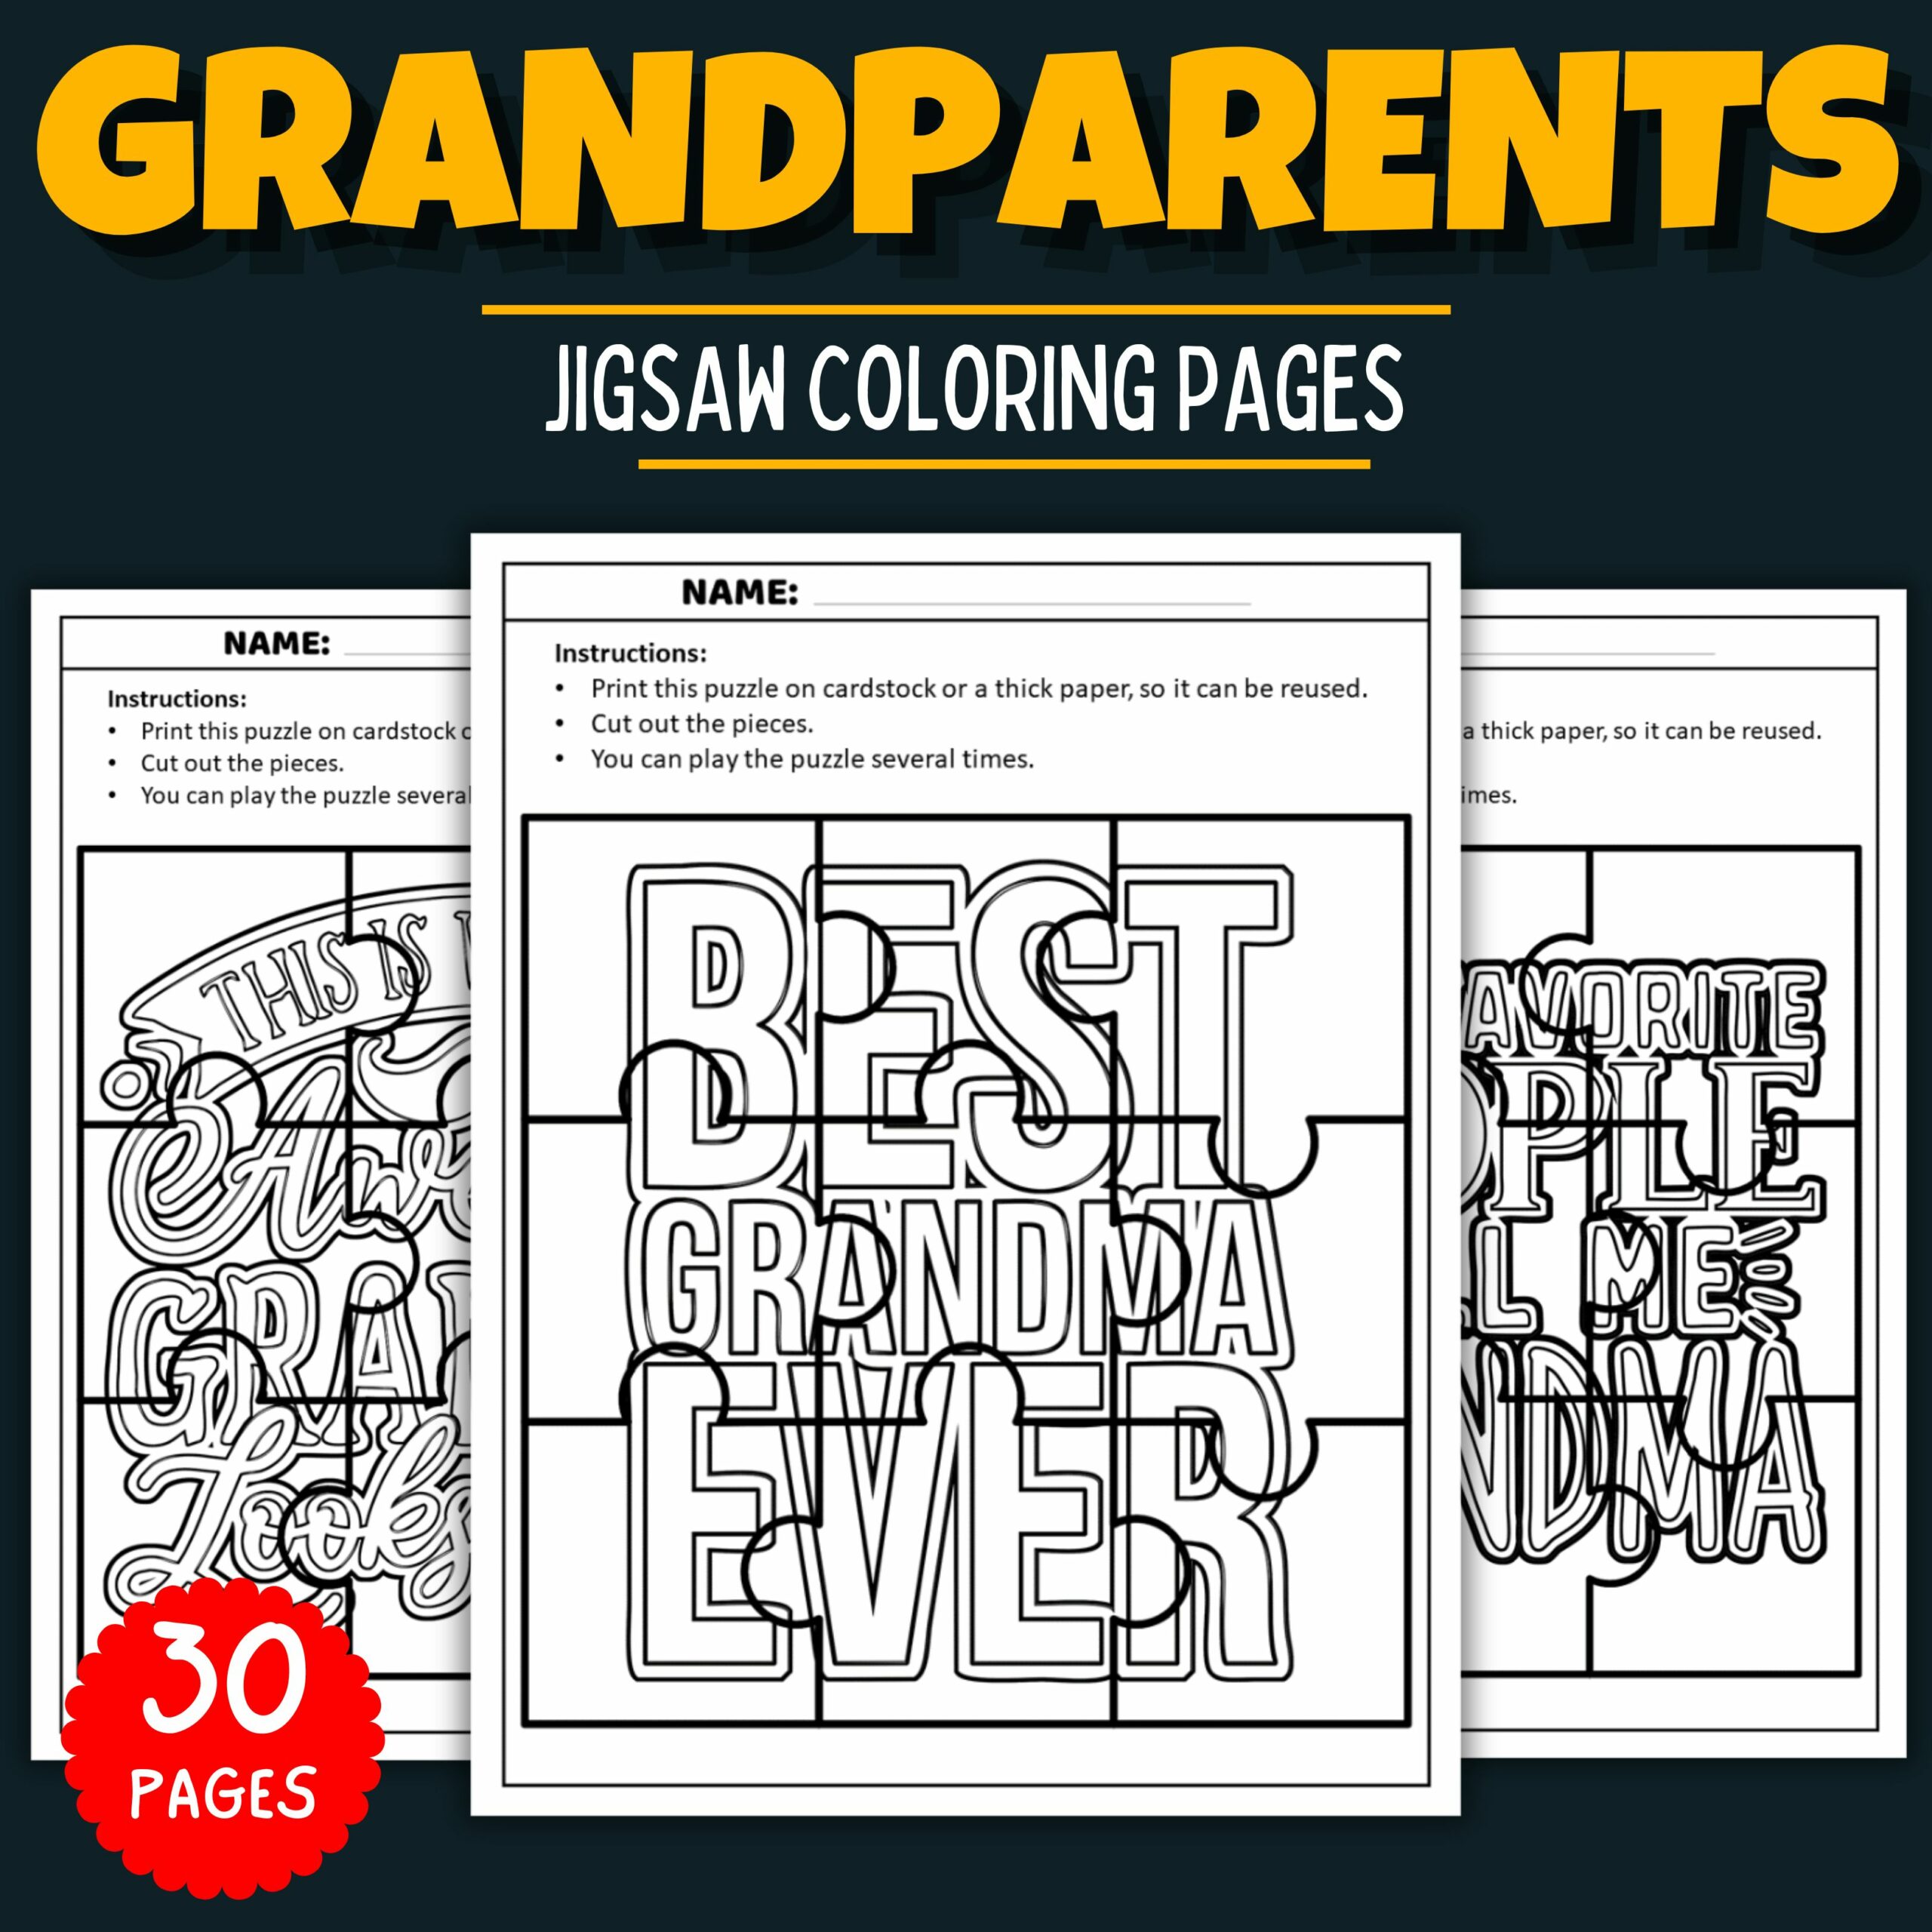 Printable grandparents day easy jigsaw quotes coloring puzzles games made by teachers